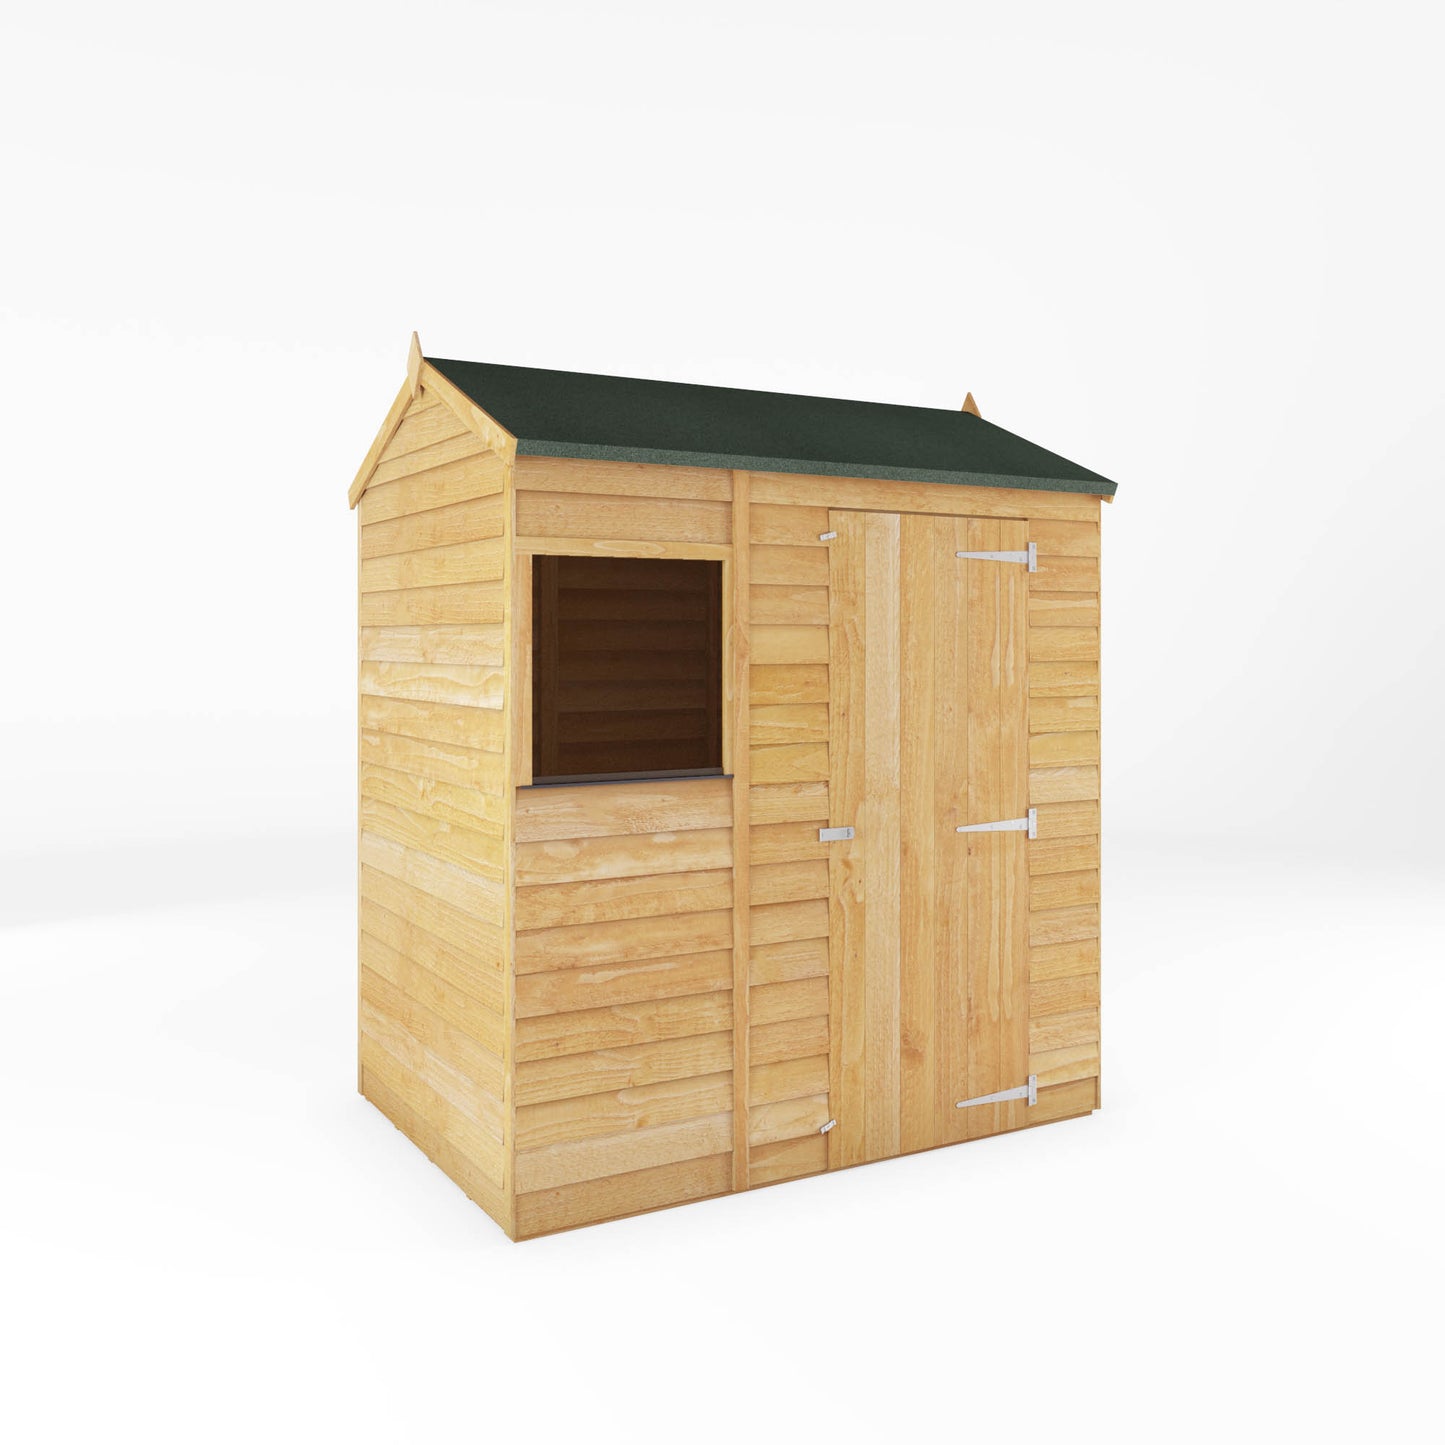 6 x 4 Overlap Reverse Apex Wooden Shed